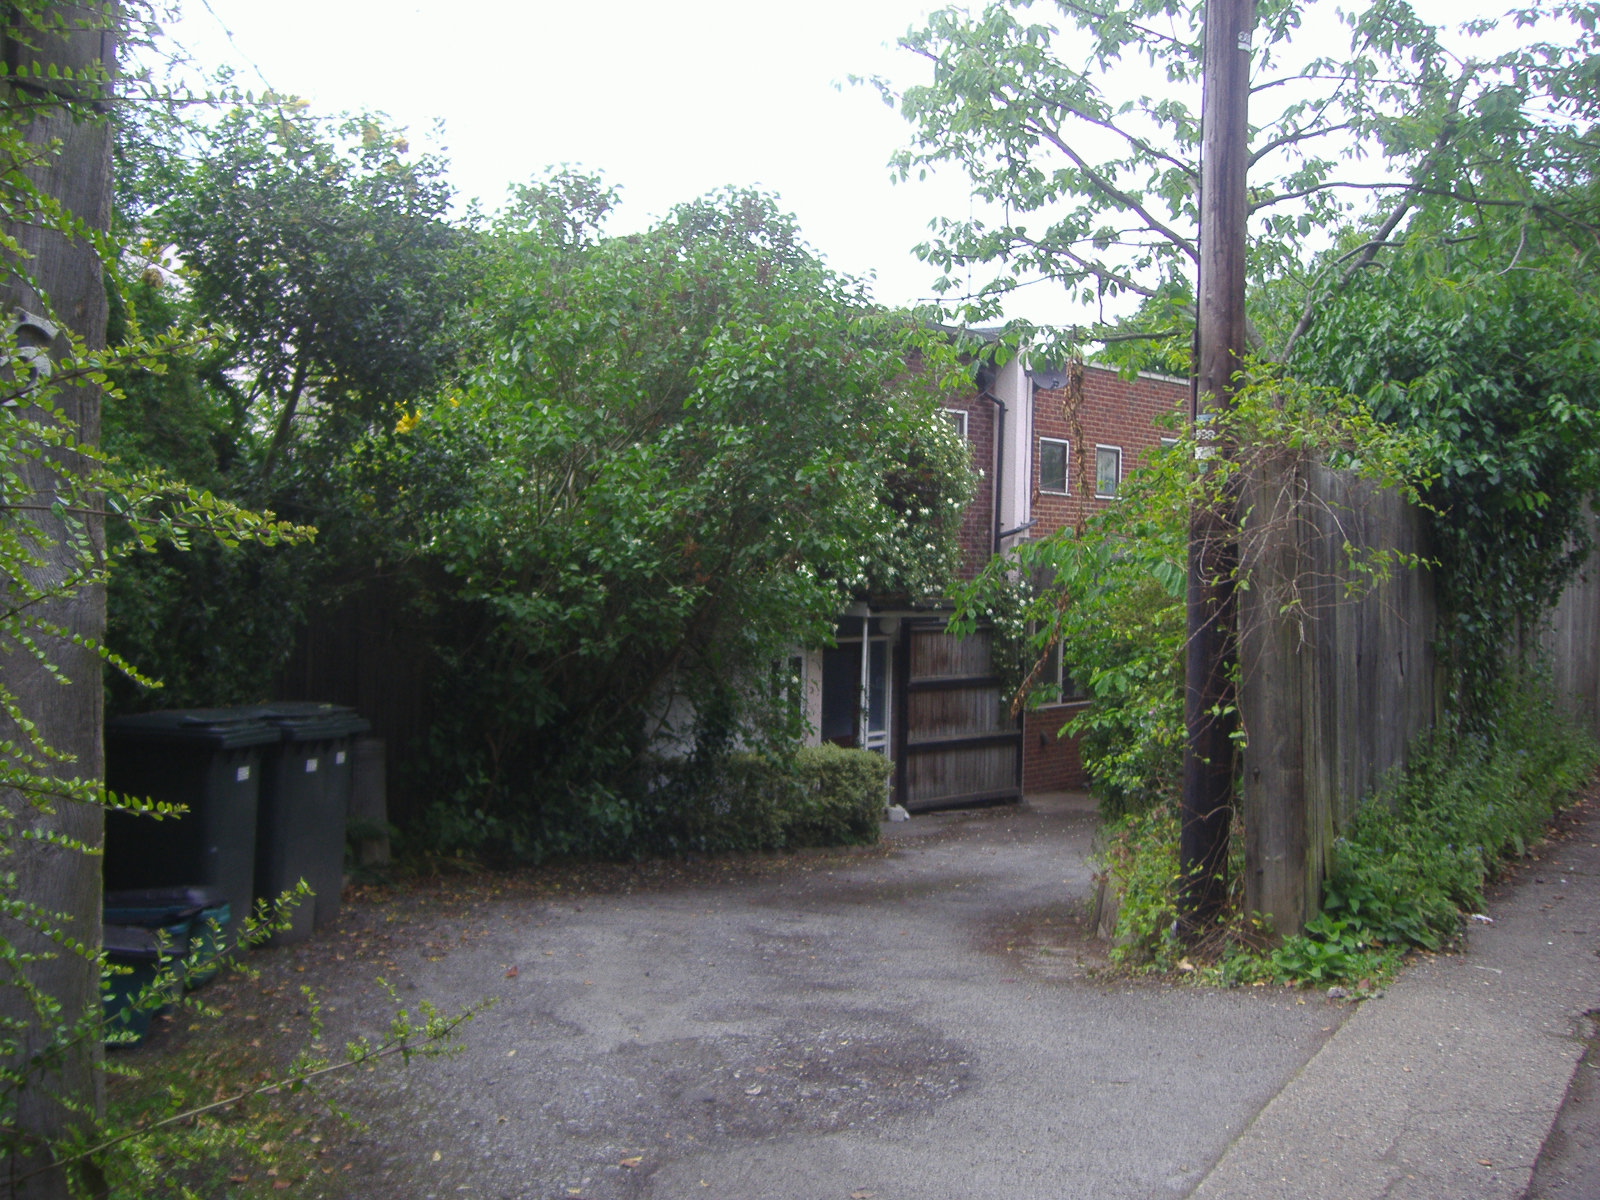 a po of a driveway with a trash can, building and tree